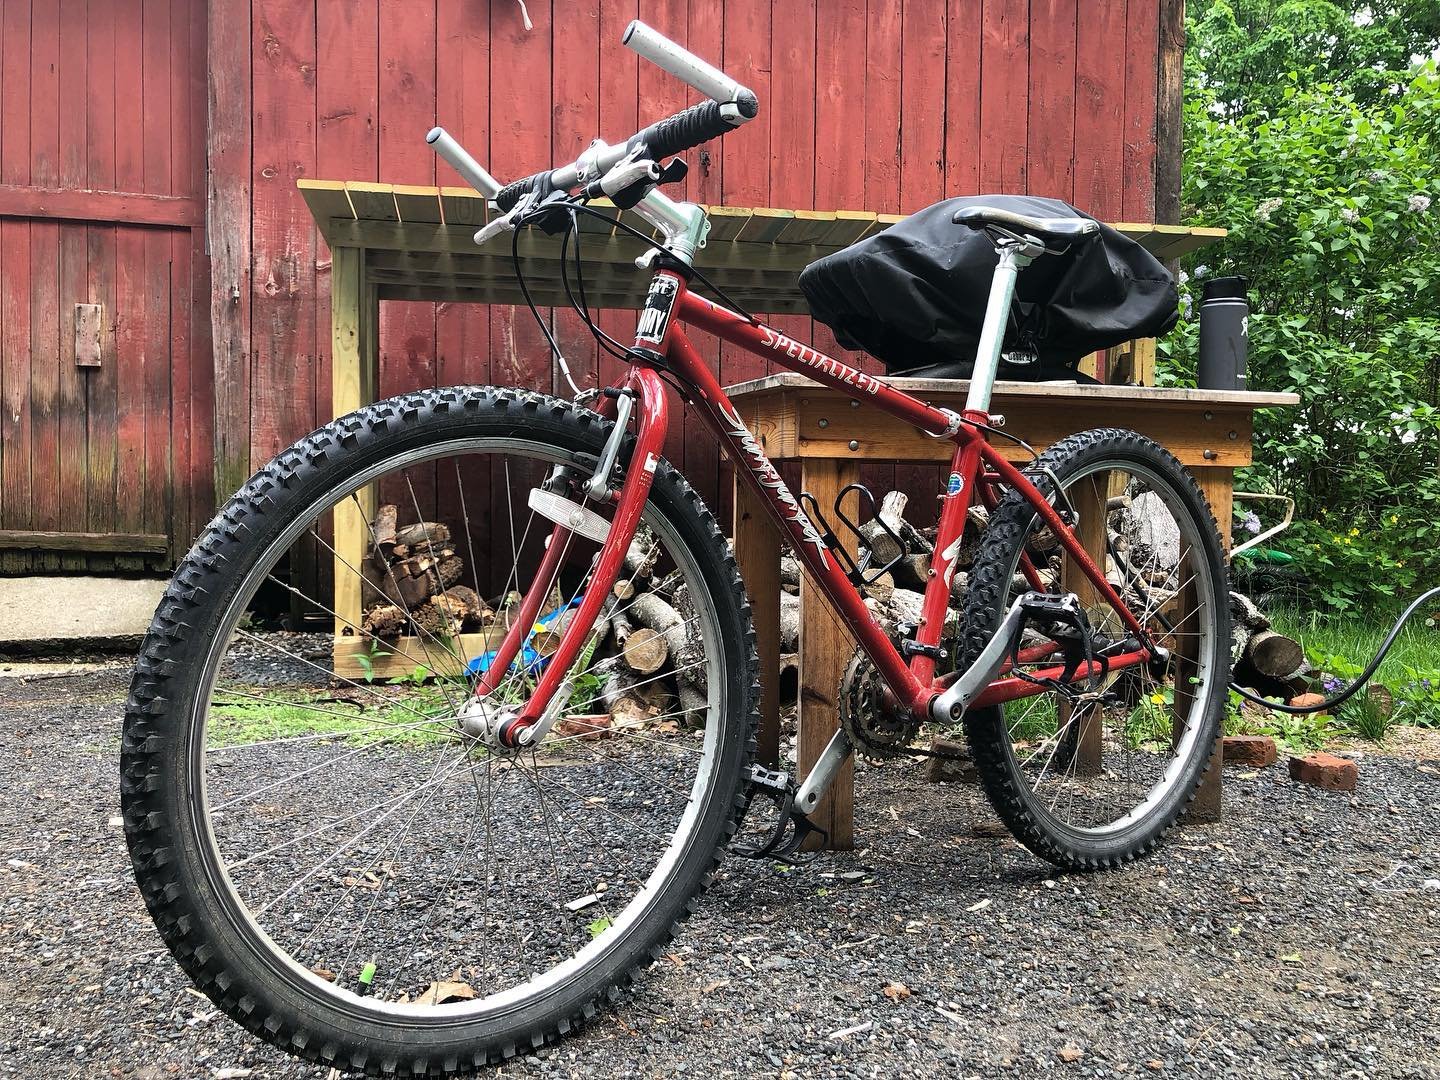 Bought this bike when I first moved to Northampton 11 years ago. I haven&rsquo;t changed a thing. 

#stumpjumper #meatisyummy #hippies #northamptonma